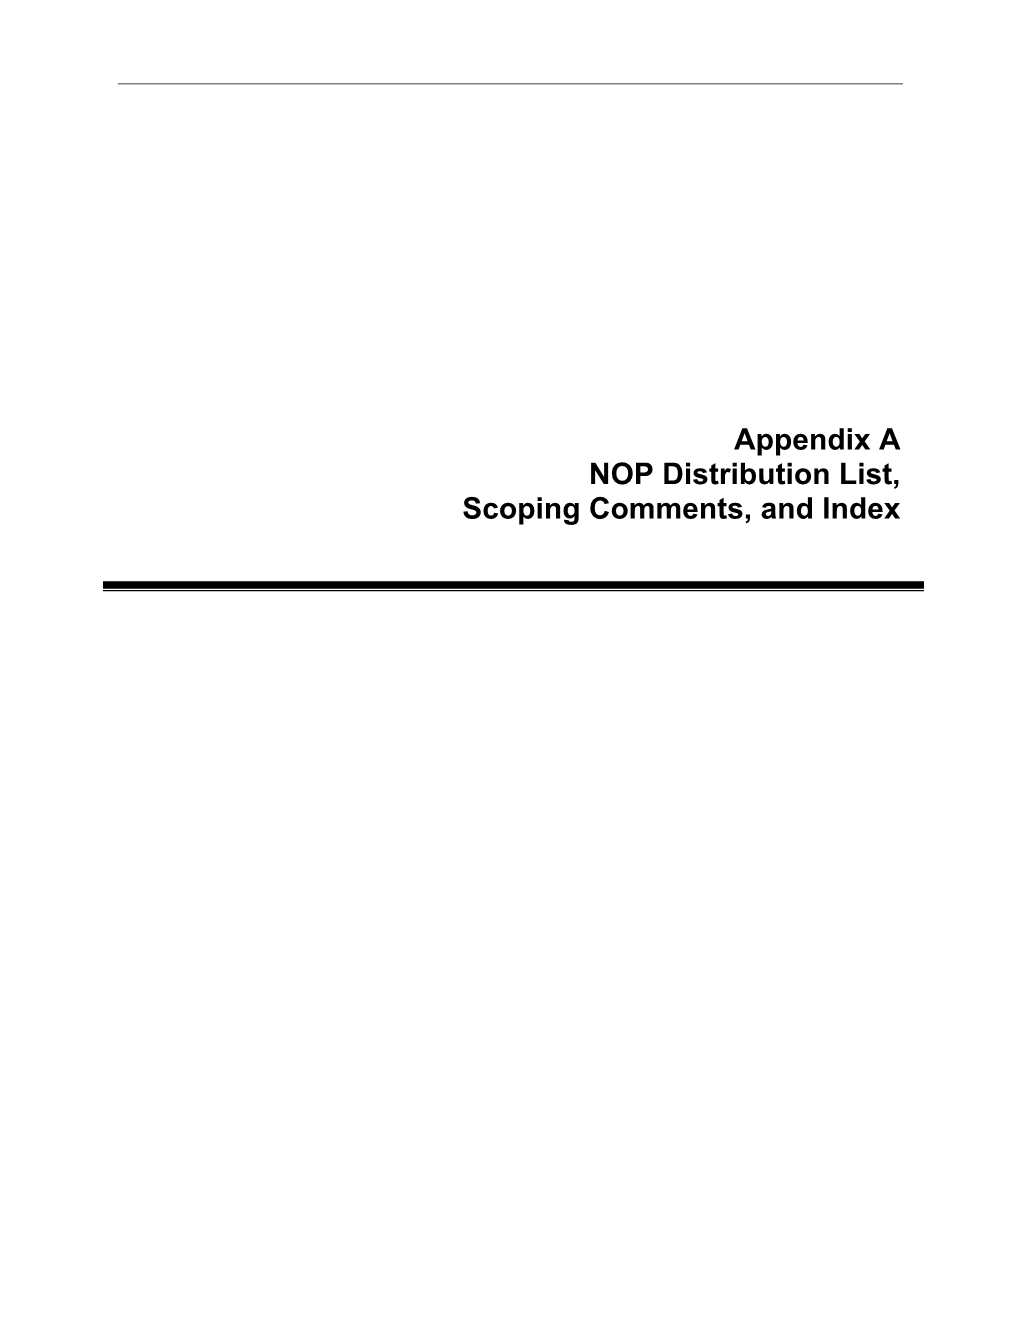 Appendix a NOP Distribution List, Scoping Comments, and Index